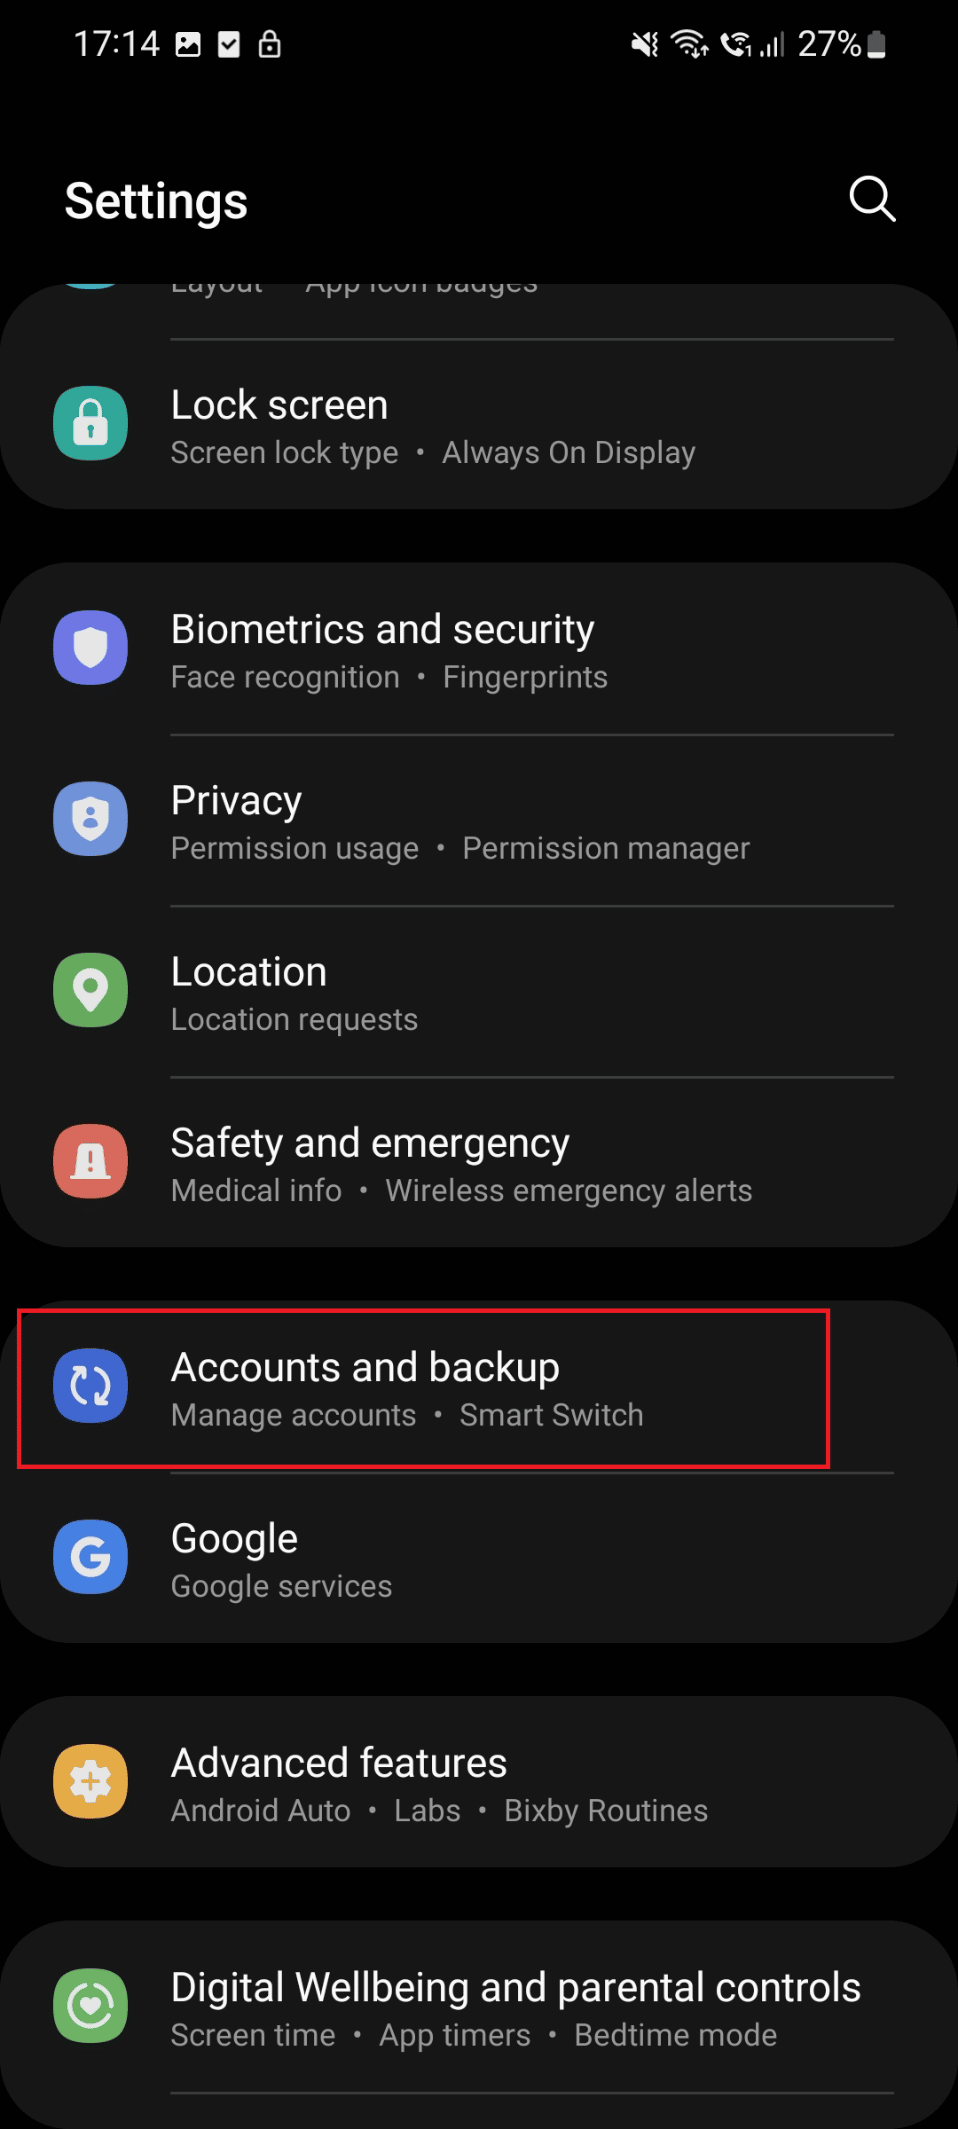 tap on the Accounts and backup option